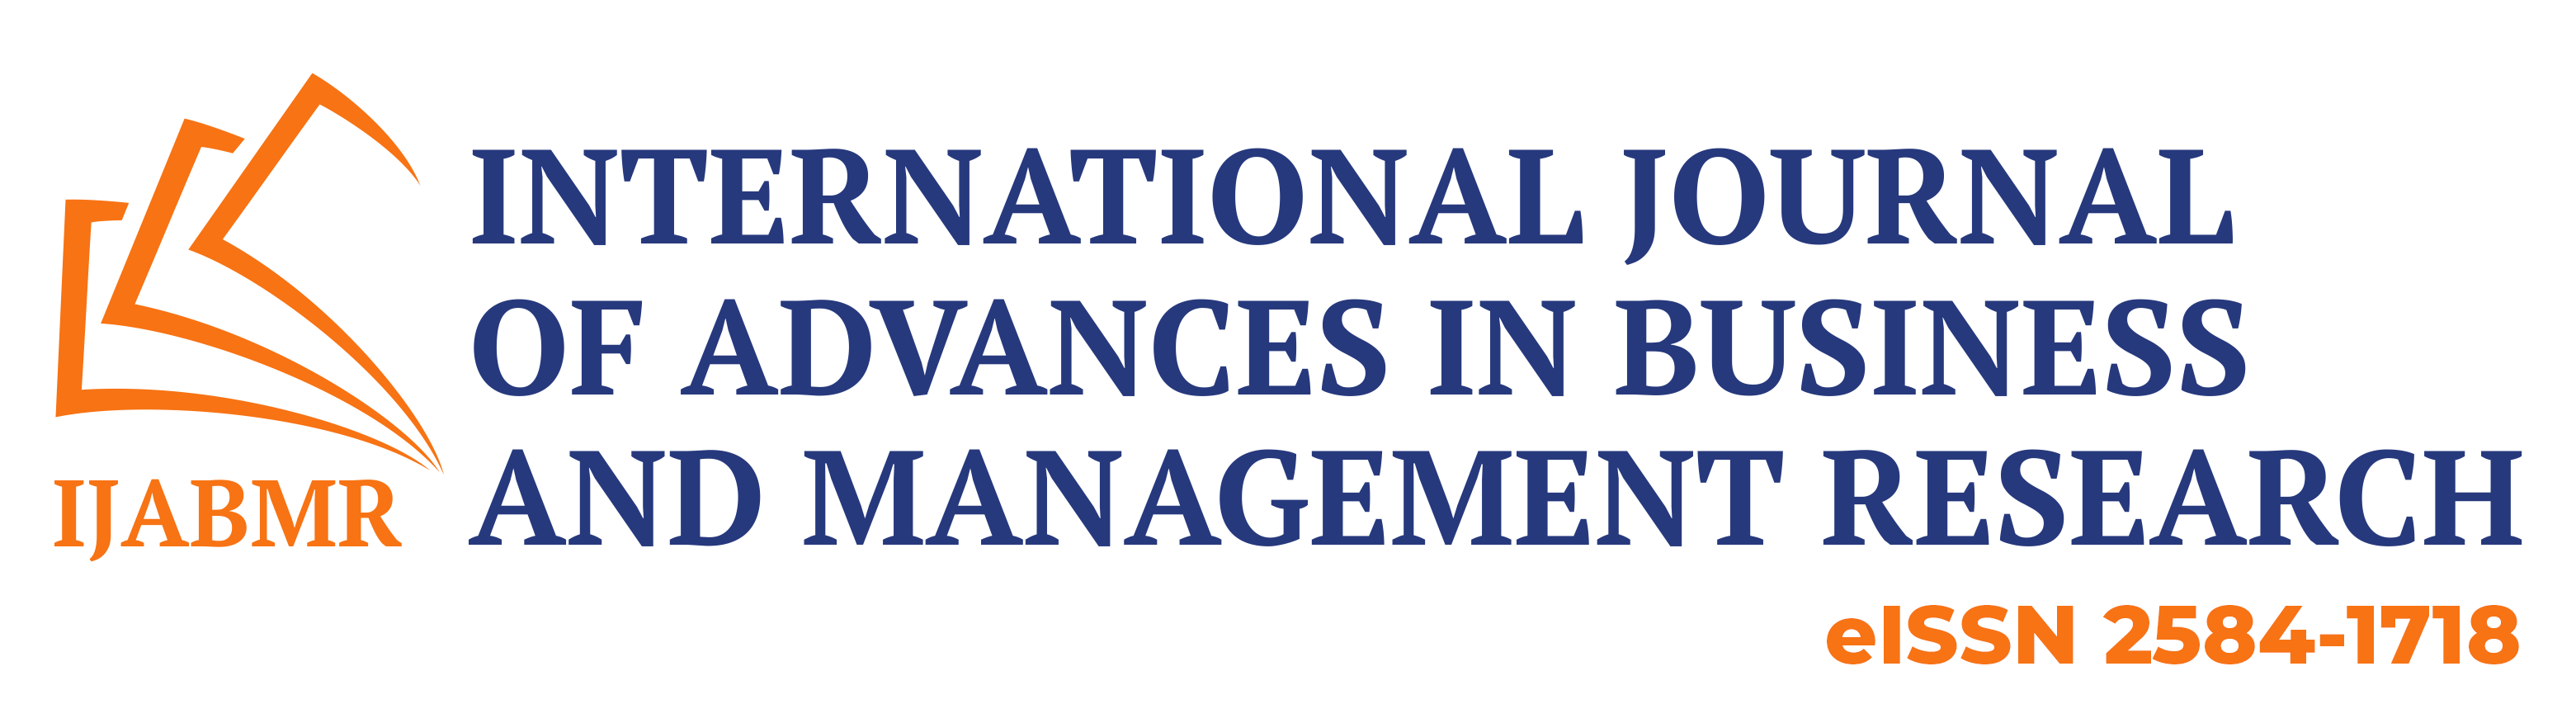 International Journal of Advances in Business and Management Research (IJABMR)